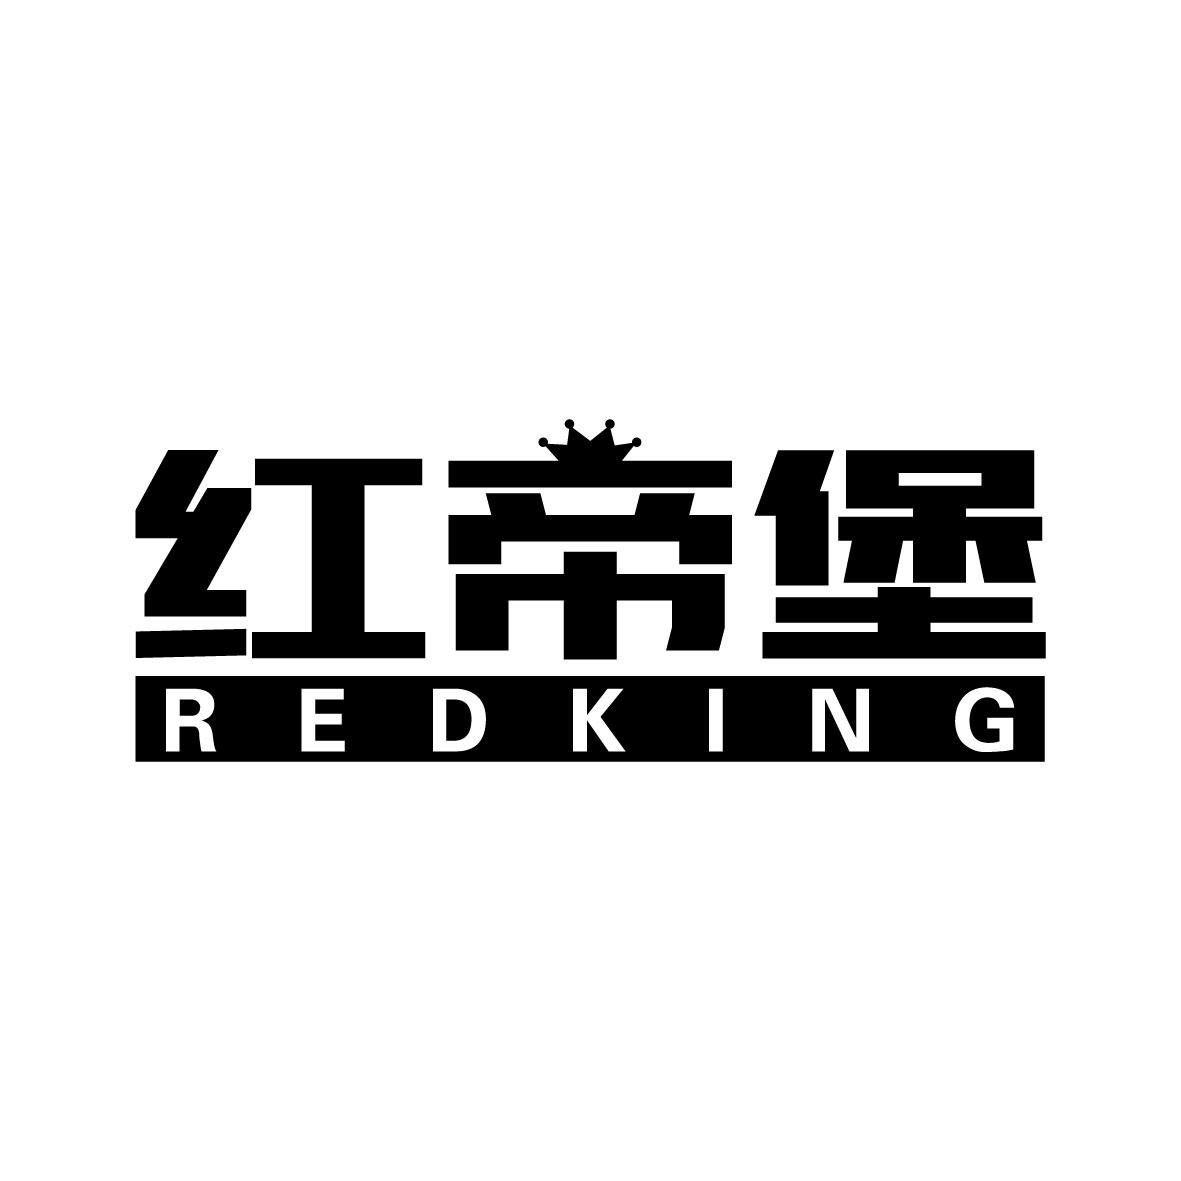 ۱ REDKING